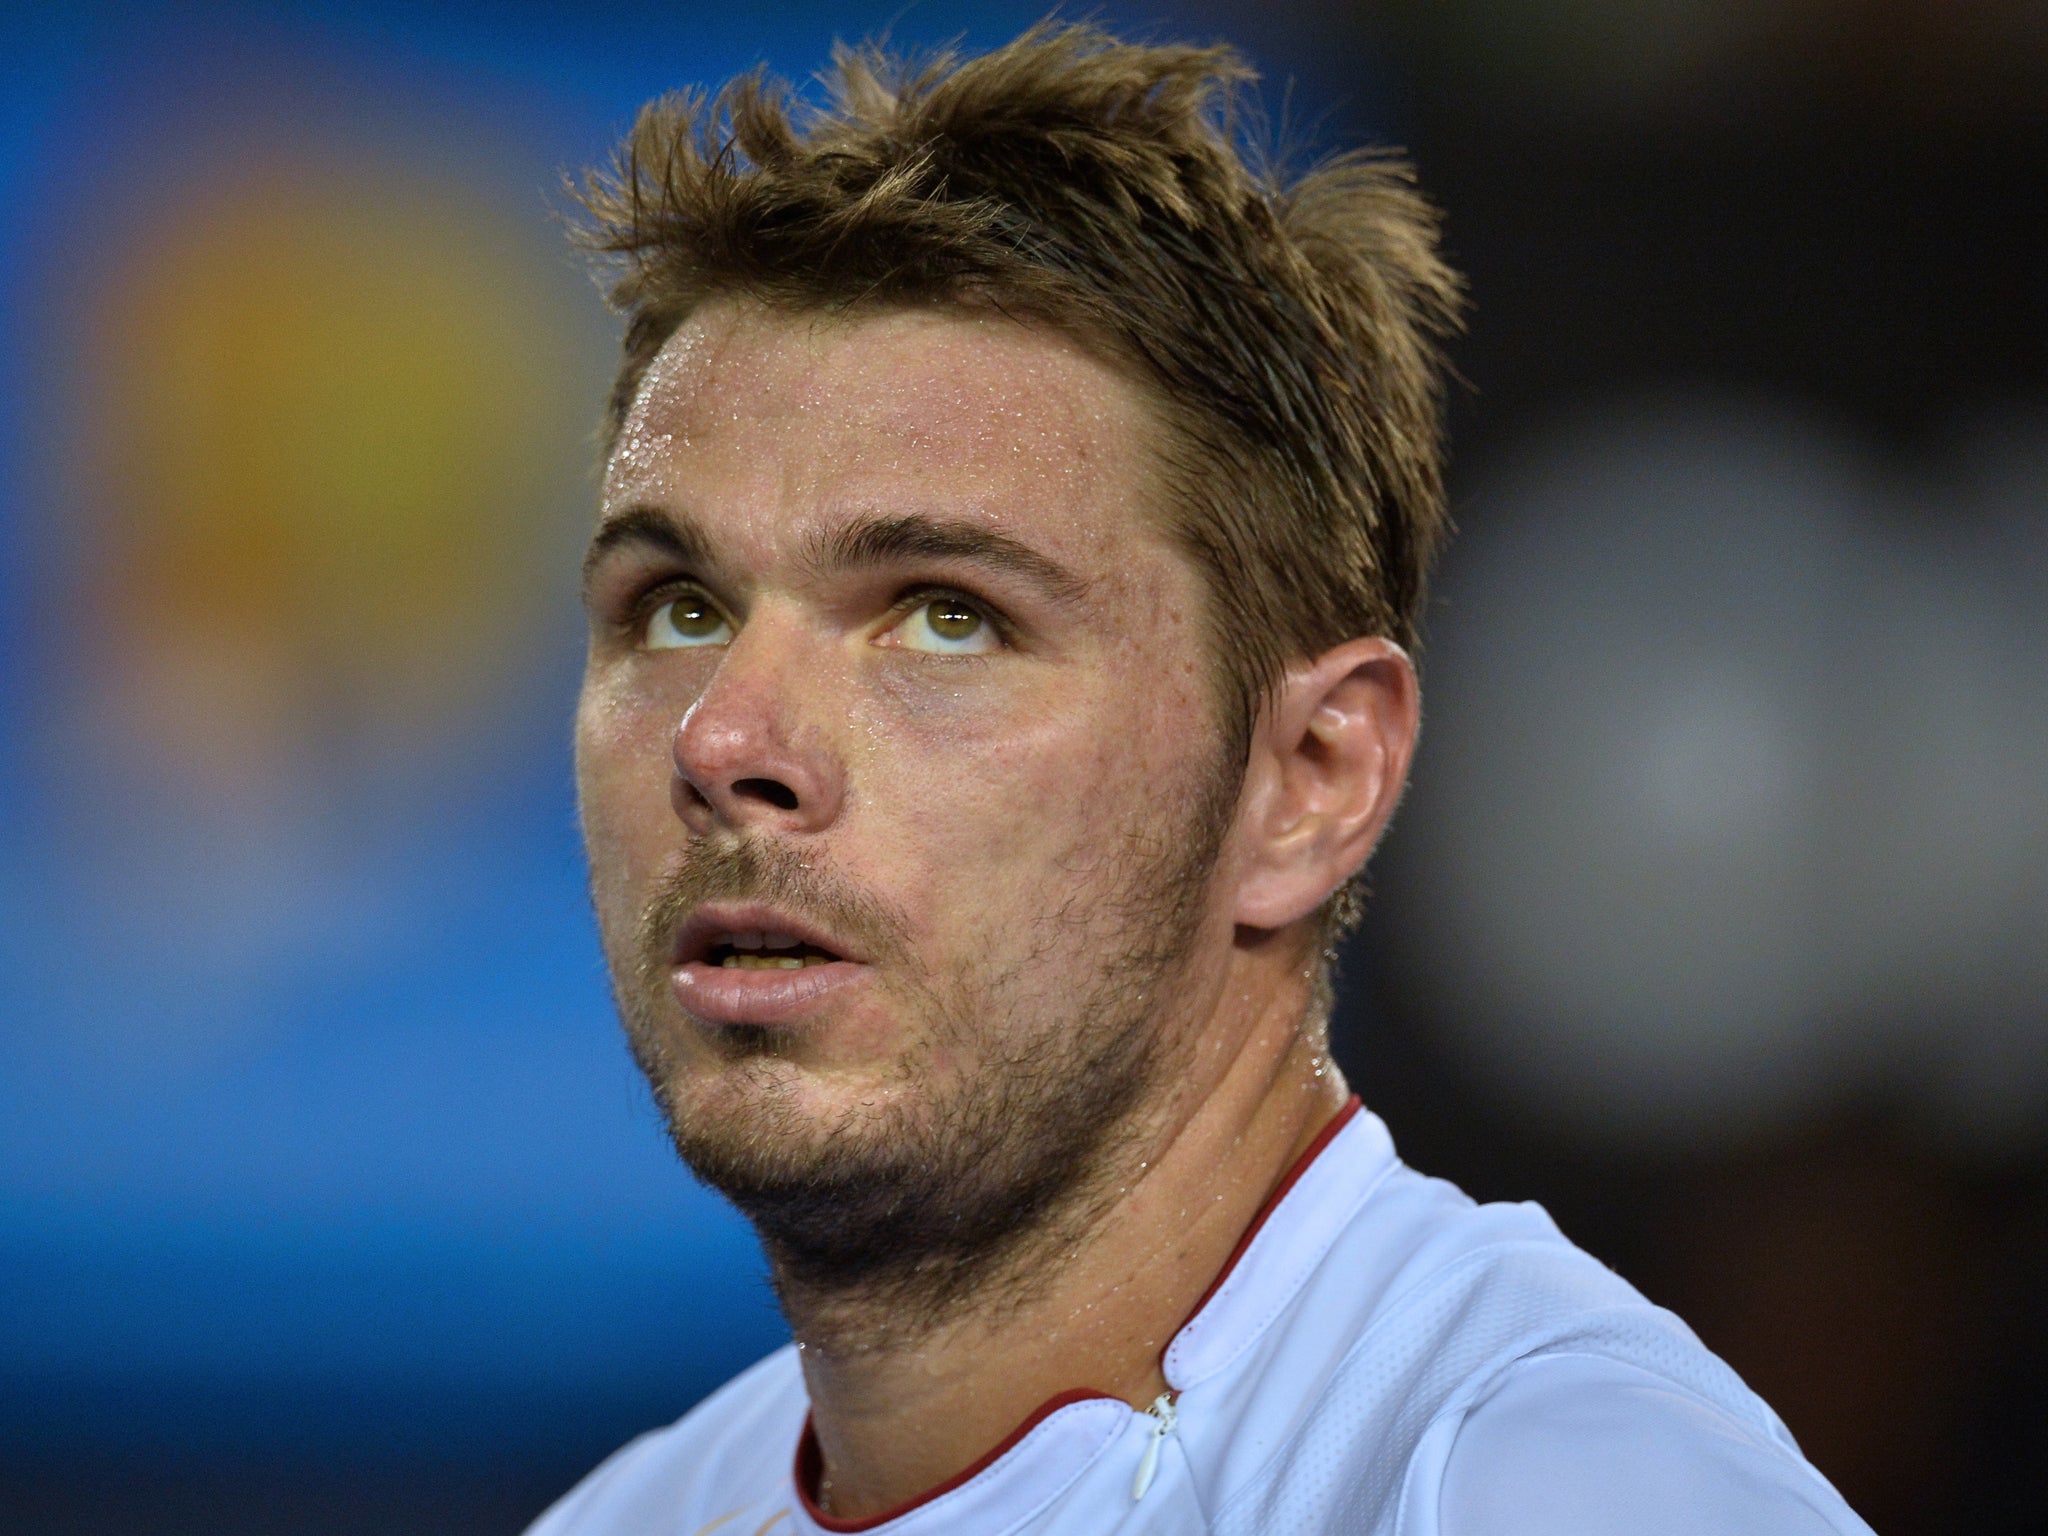 Stanislas Wawrinka says he is confident in his ability to beat Rafael Nadal even though he has never won a set against the Spaniard